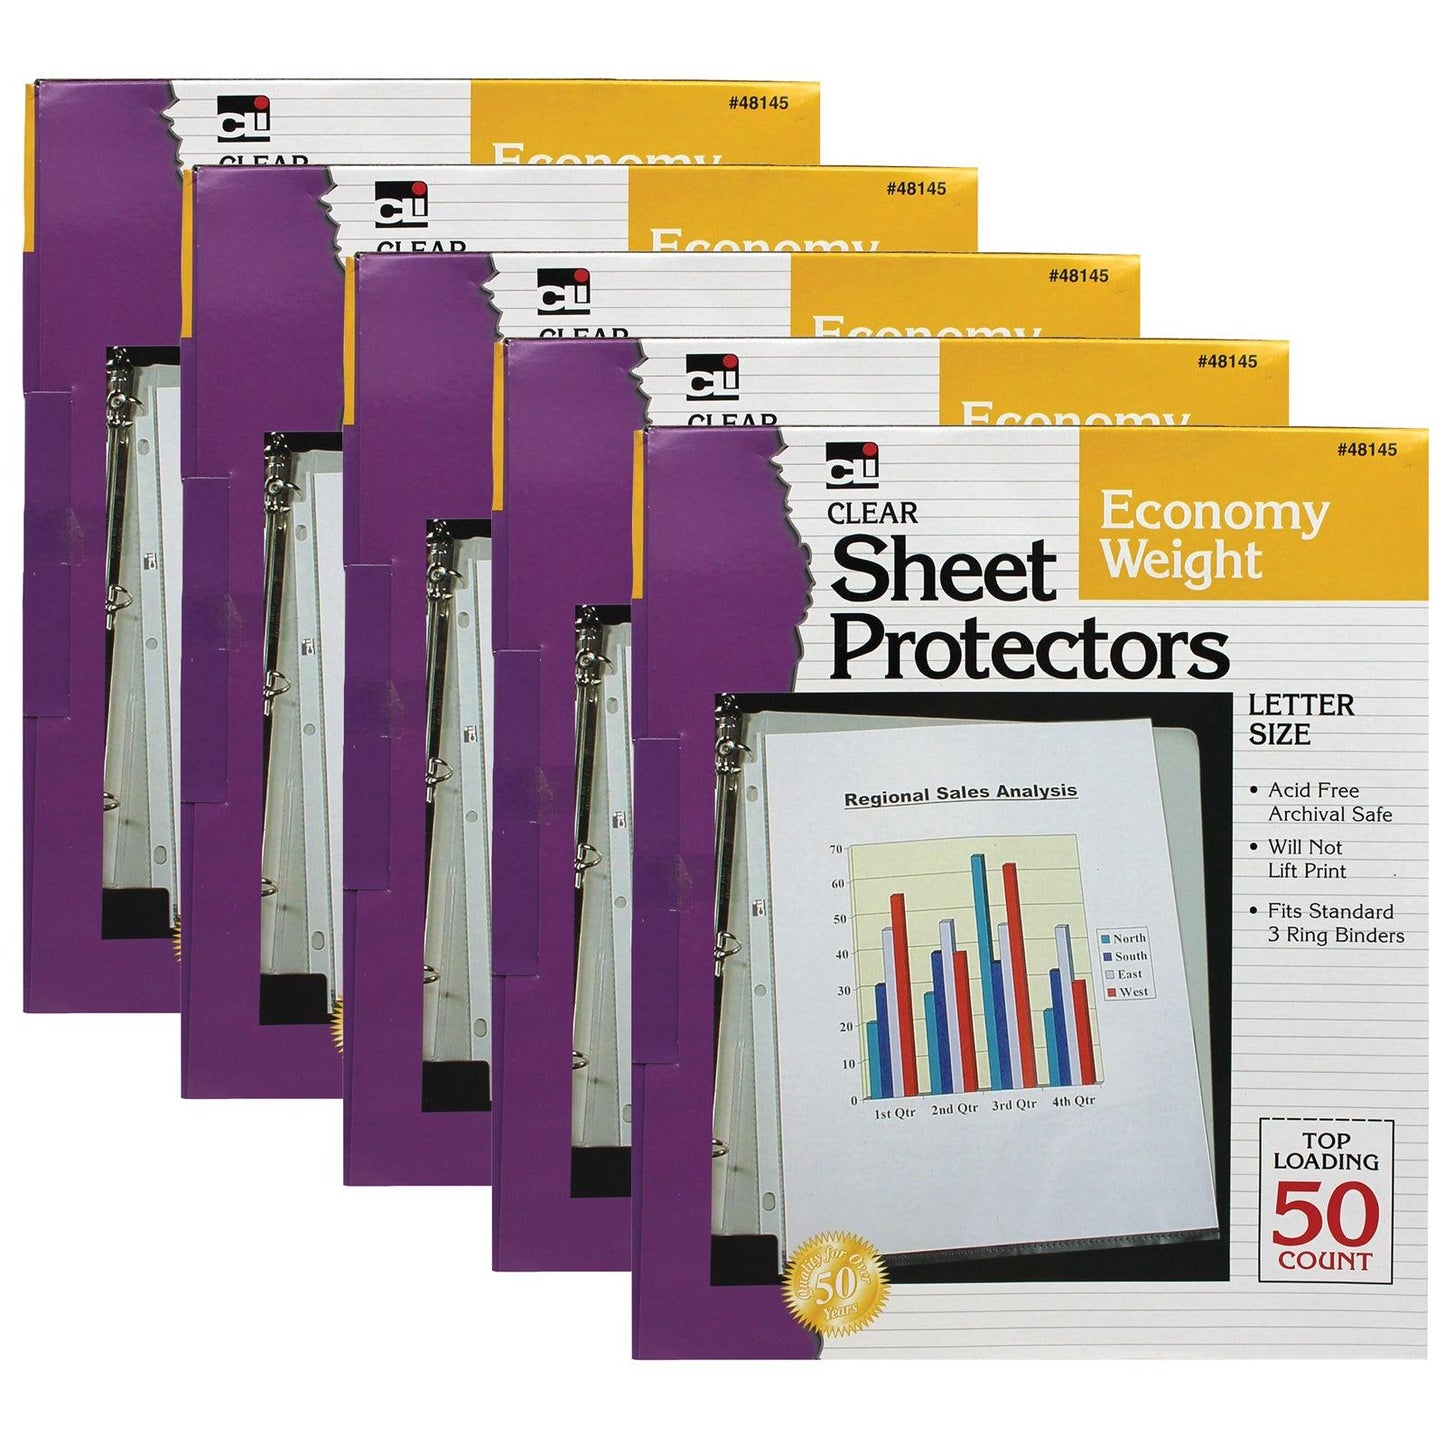 Sheet Protectors, Economy Weight, Letter Size, Clear, 50 Per Box, 5 Boxes - Loomini